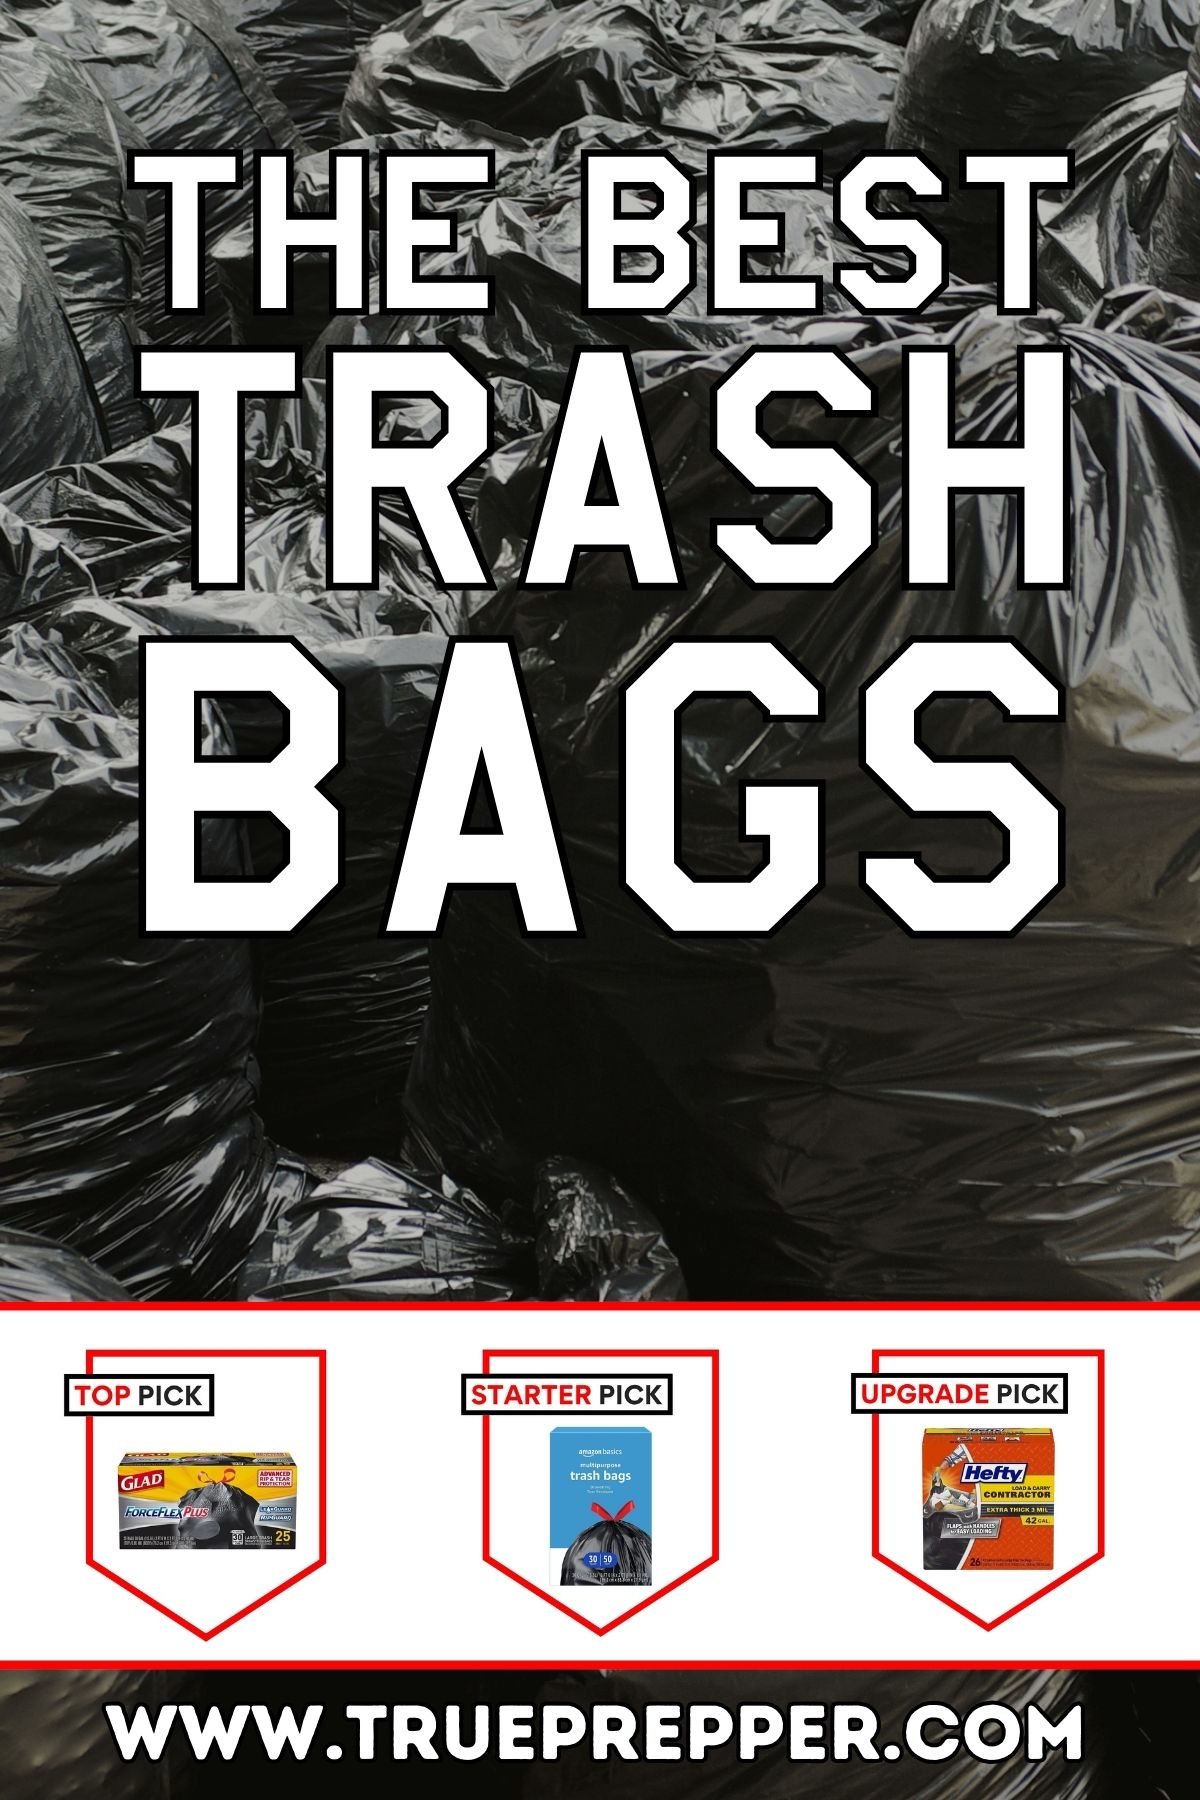 The Best Trash Bags